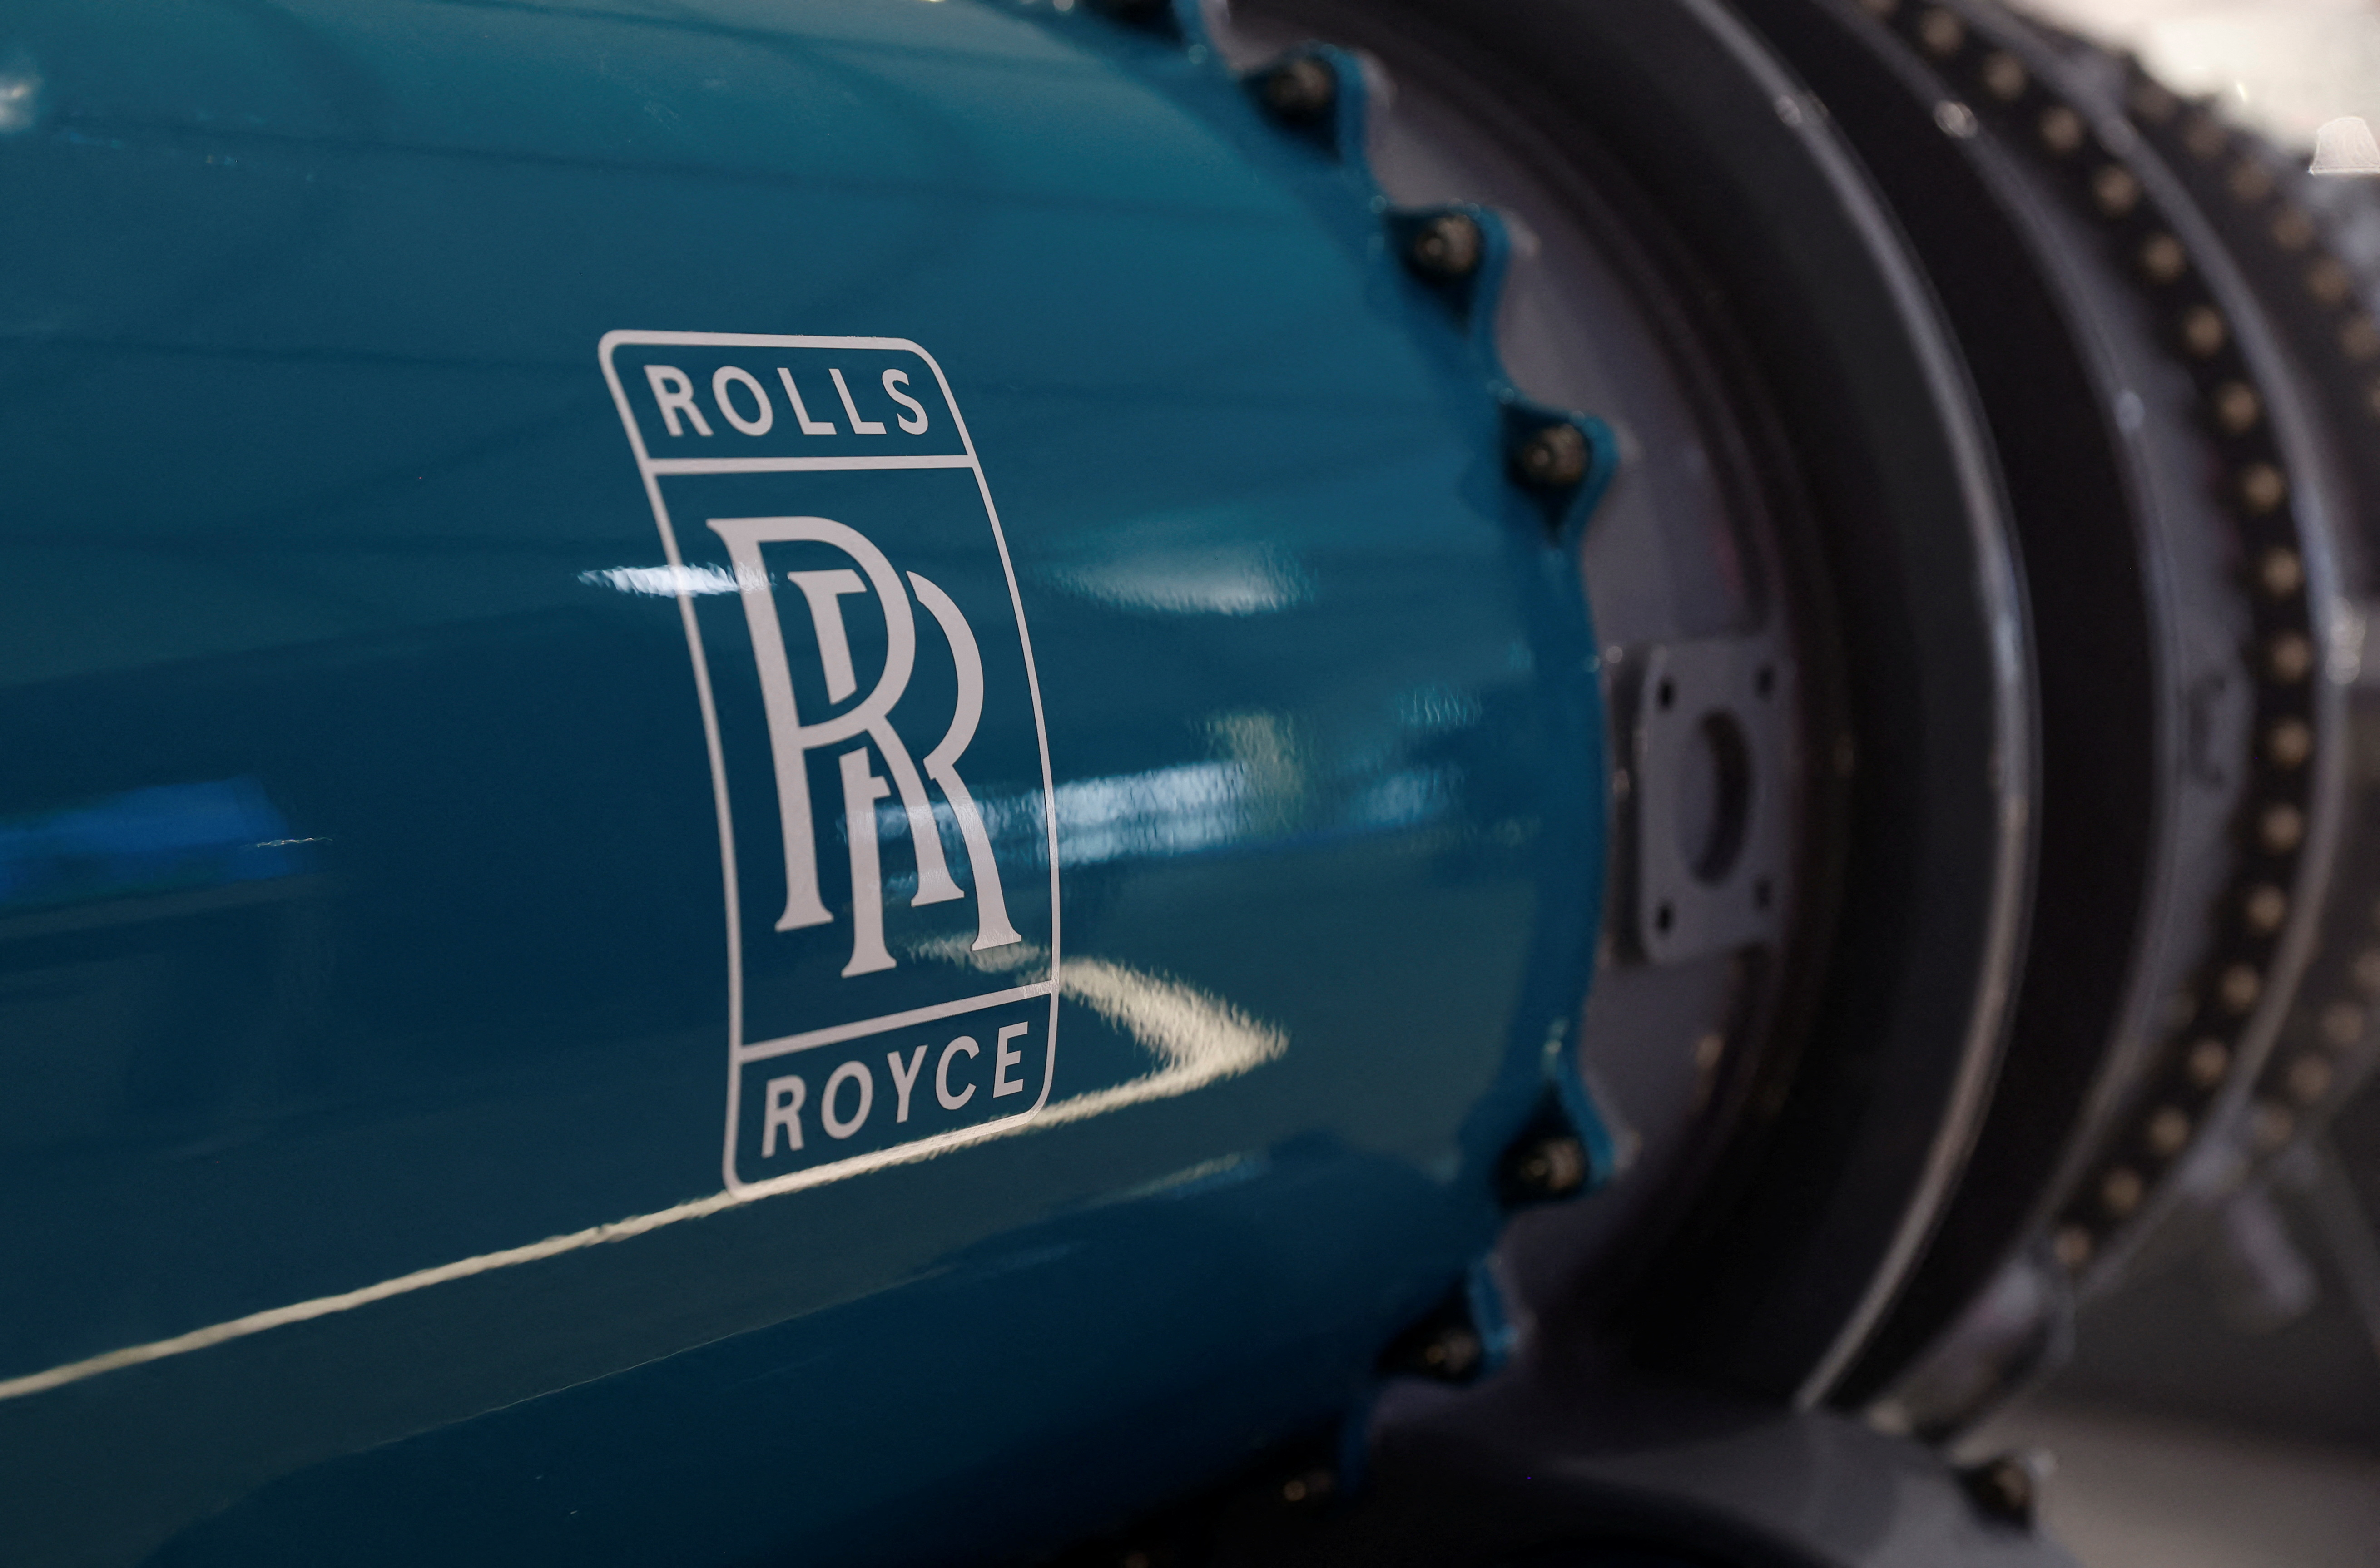 Signage for Rolls Royce is seen on model of an engine at the Farnborough International Airshow, in Farnborough